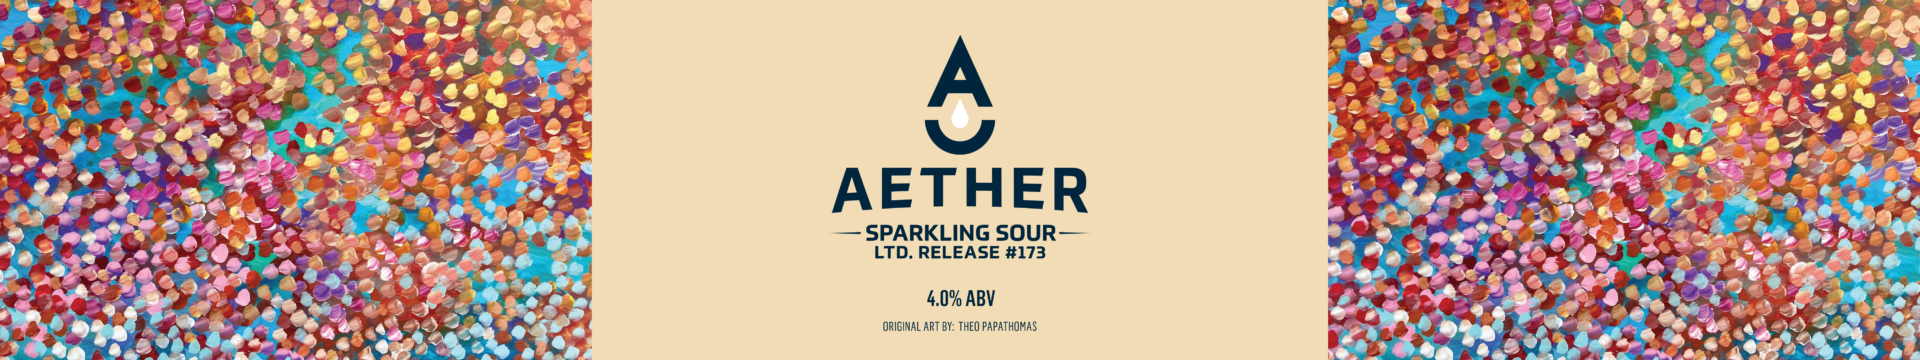 Aether #173 Sparkling Sour Banner